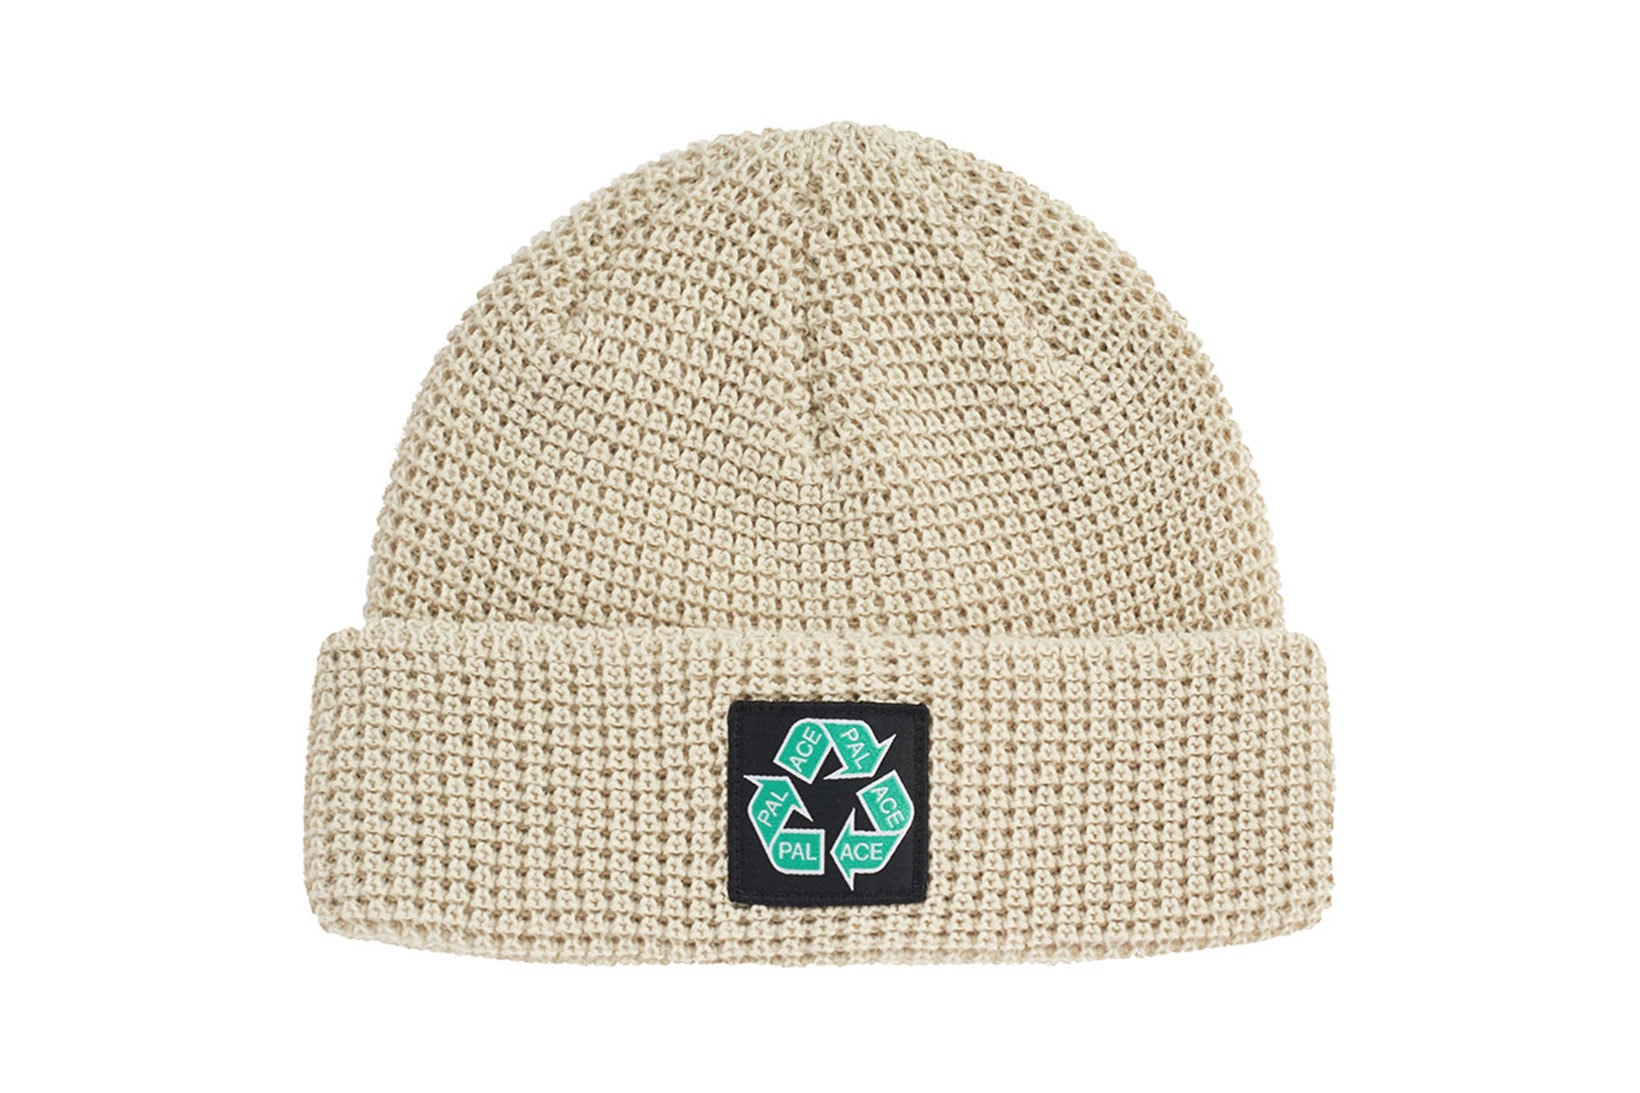 palace spring drop 4 collection logo beanie hat recycle green oatmeal